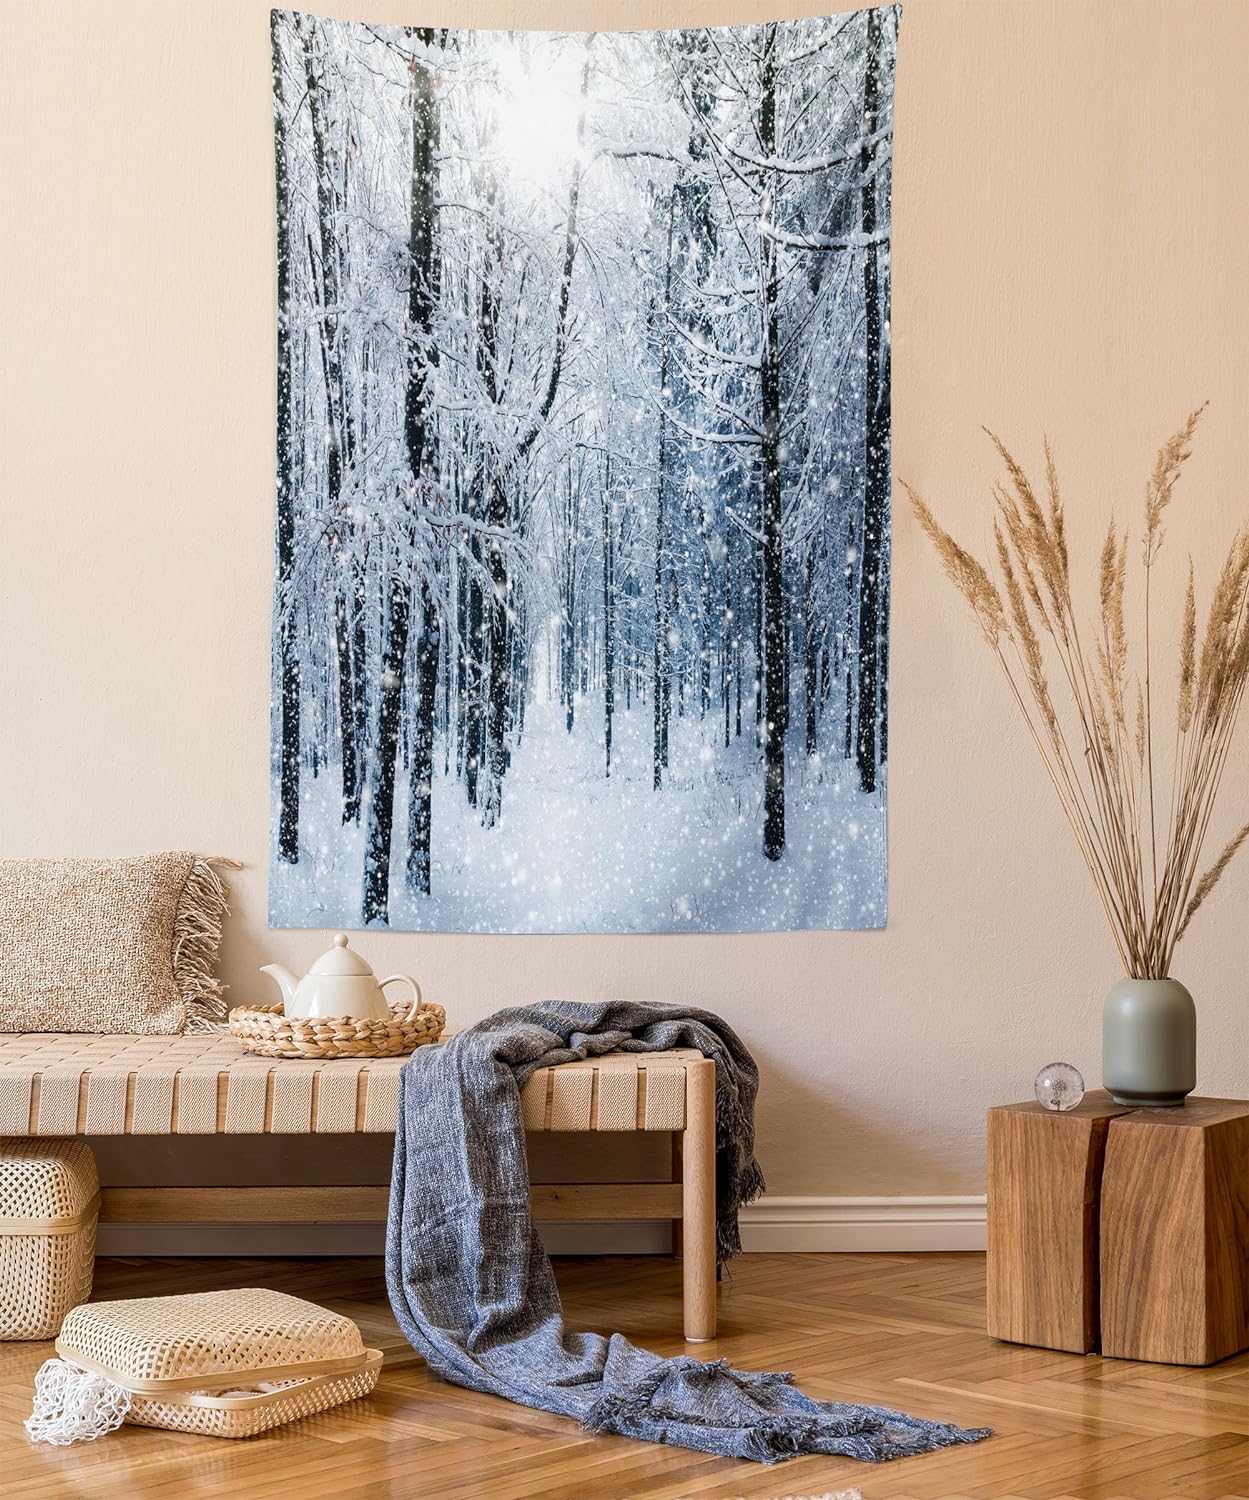 Ambesonne Winter Tapestry, Snow Covered Forest Idyllic Early Morning Scenery Seasonal Xmas Nature, Wall Hanging for Bedroom Living Room Dorm Decor, 60 X 80, Black White Slate Blue